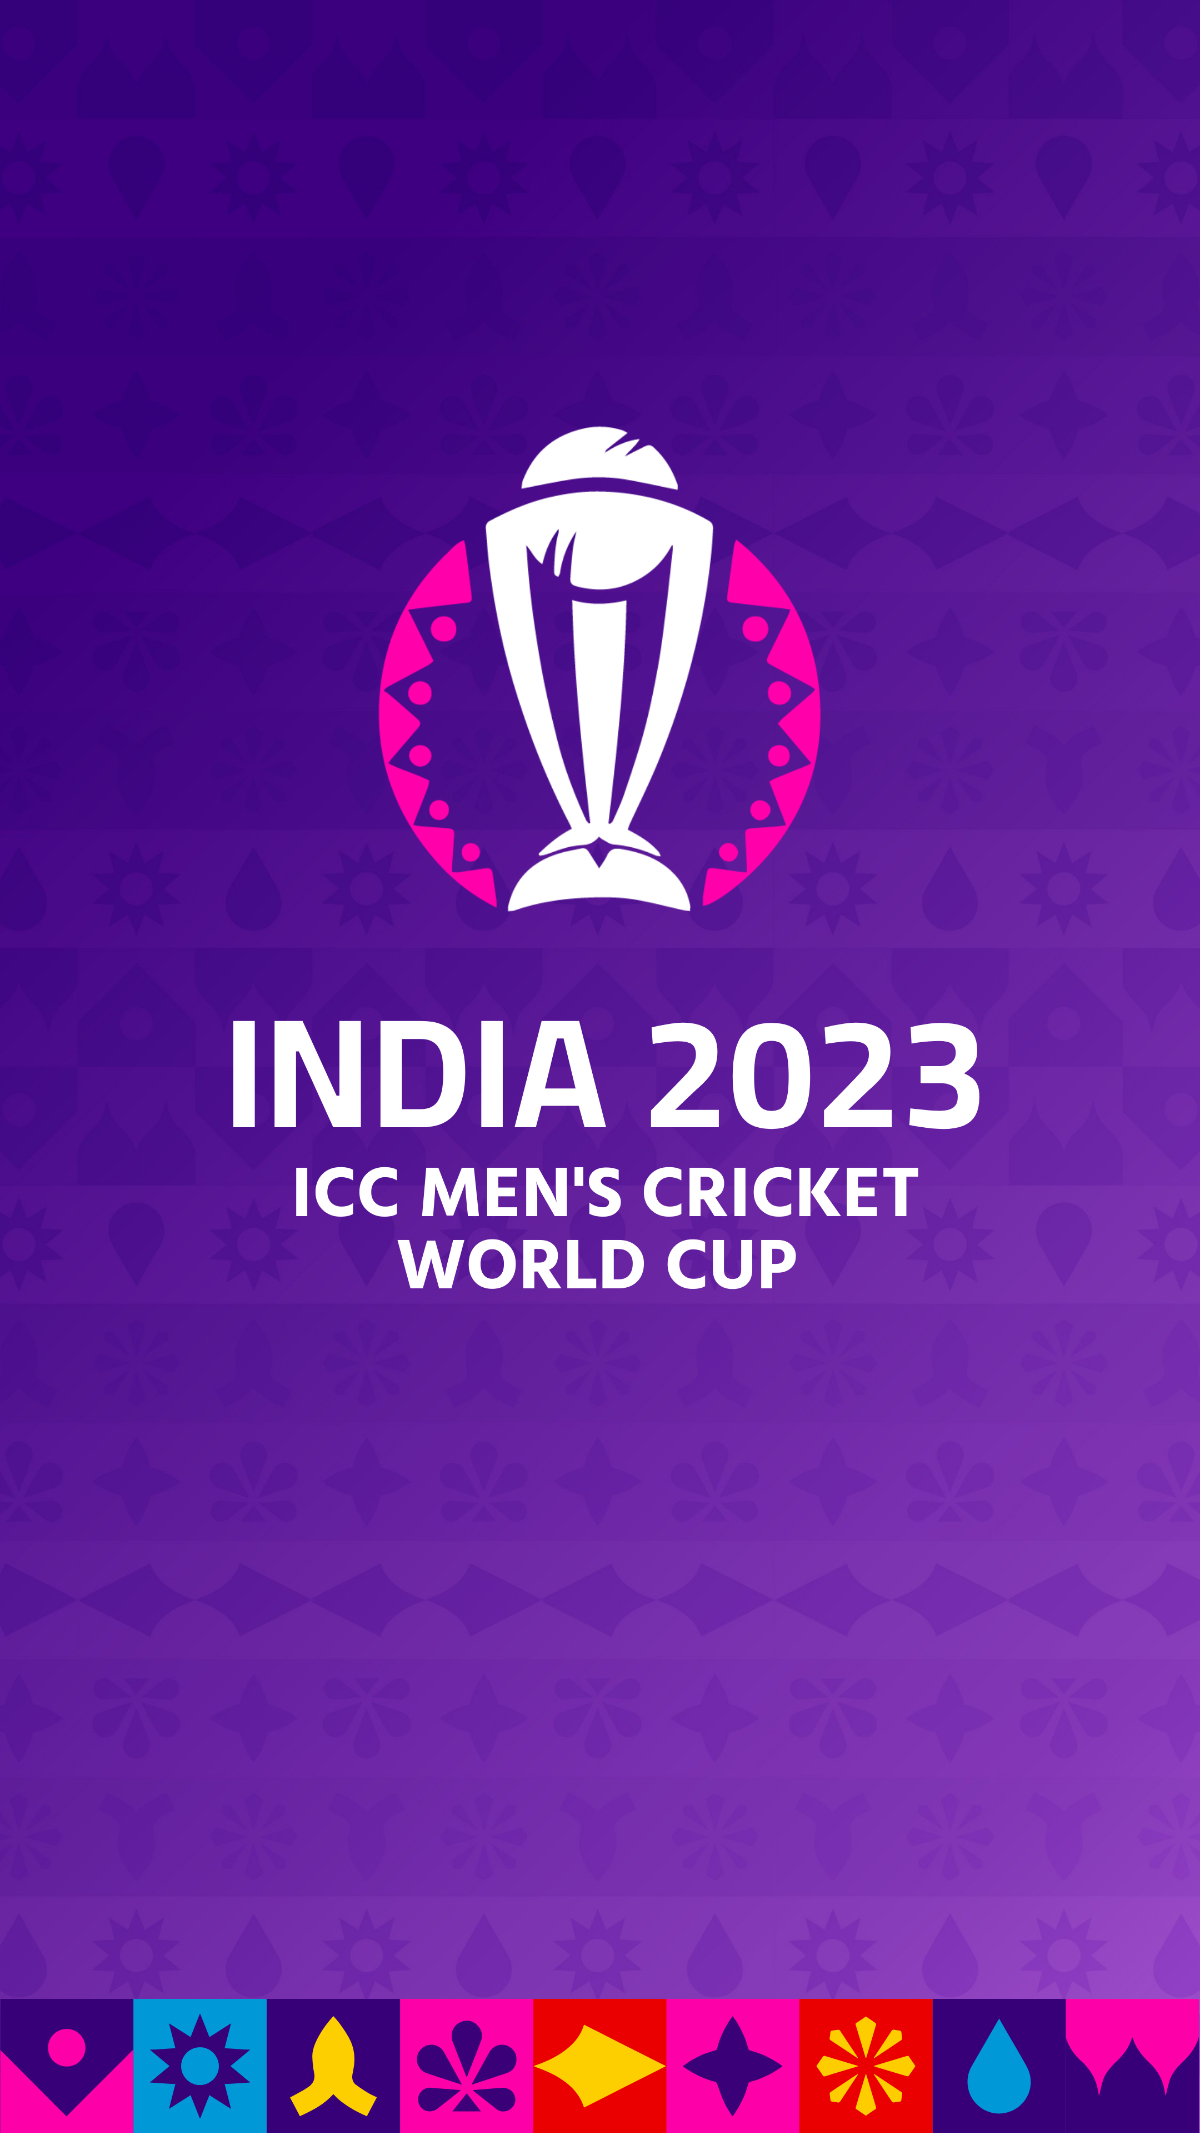 Free 2023 ICC Men's Cricket World Cup Phone Wallpaper in PDF, Illustrator, PSD, SVG, PNG